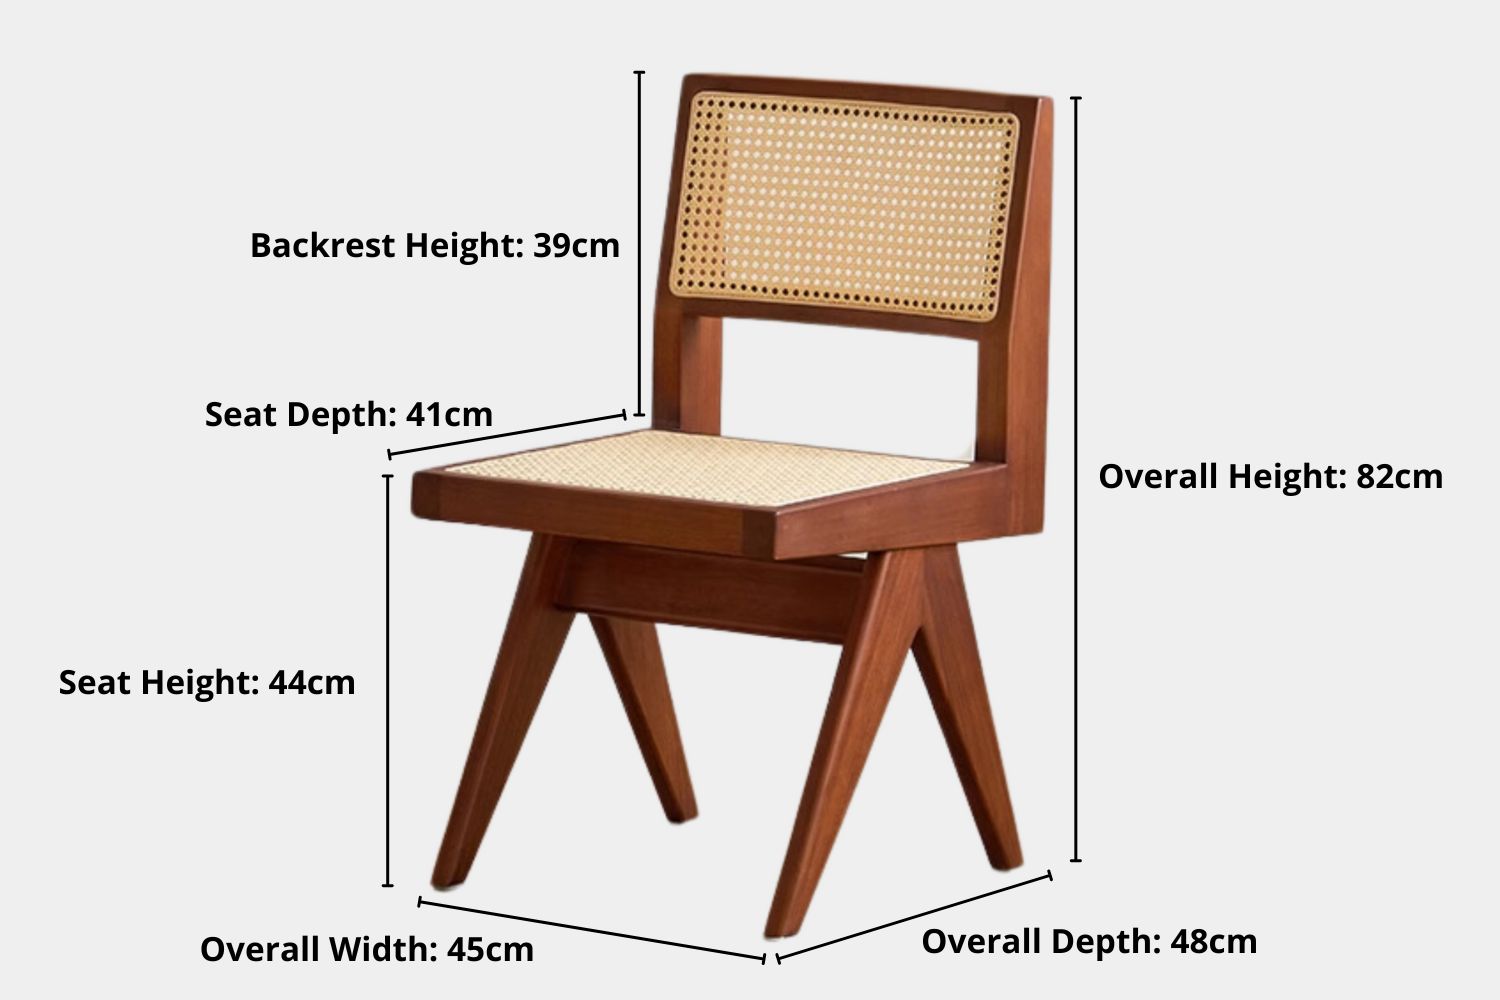 Key product dimensions such as depth, width and height for Tara Poplar Wood Chair